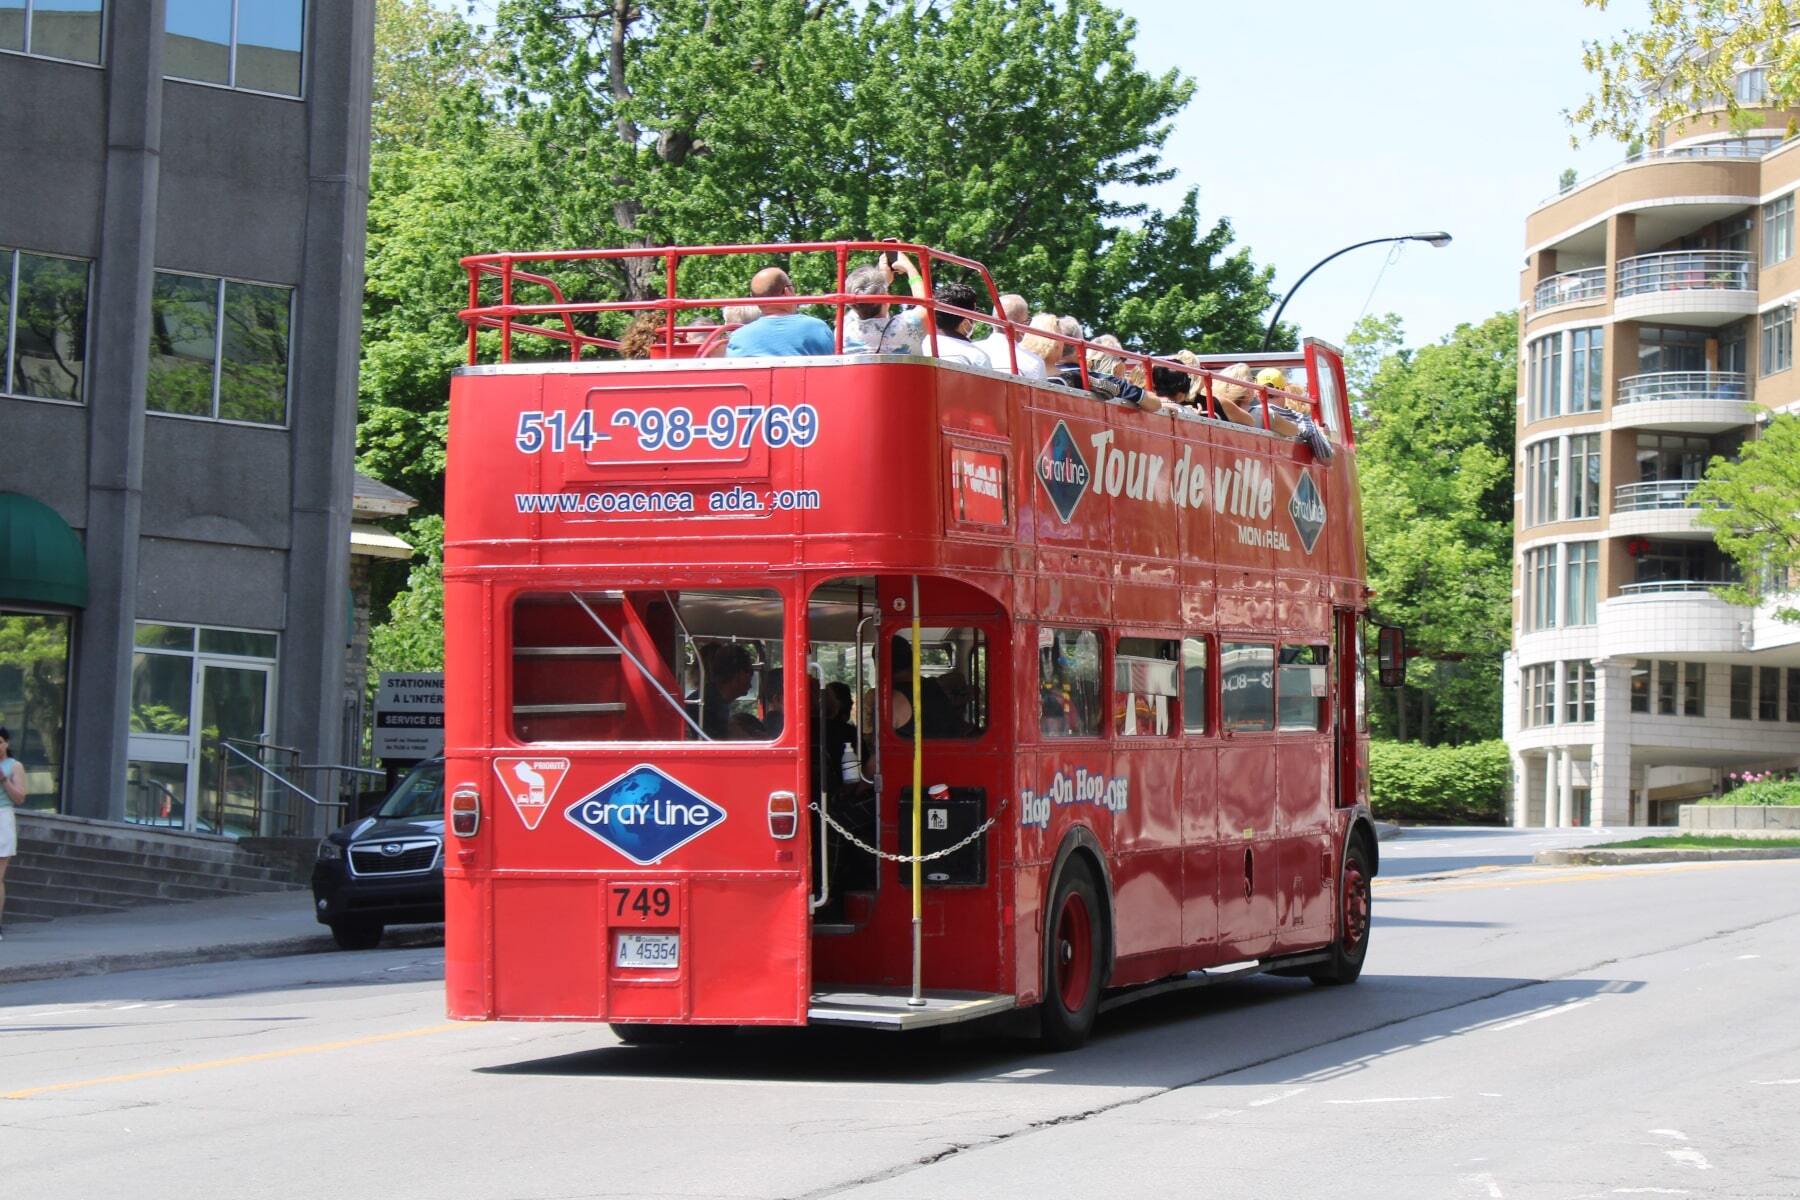 <p>Multi-stop sightseeing buses are a simple, but rather expensive, way to explore. Montreal is considered one of North America’s easiest <a href="https://montrealtips.com/2021/04/22/montreal-one-of-north-americas-most-walkable-cities/" rel="noreferrer noopener">cities to navigate on foot.</a> In fact, there’s no need to use such services in this Quebec metropolis. Take advantage of your smartphone’s GPS or buy a 10-ticket pass from the Société de transport de Montréal (STM) for longer trips. That should be more than sufficient for exploring the “city of a hundred bell towers” at your own pace.</p>